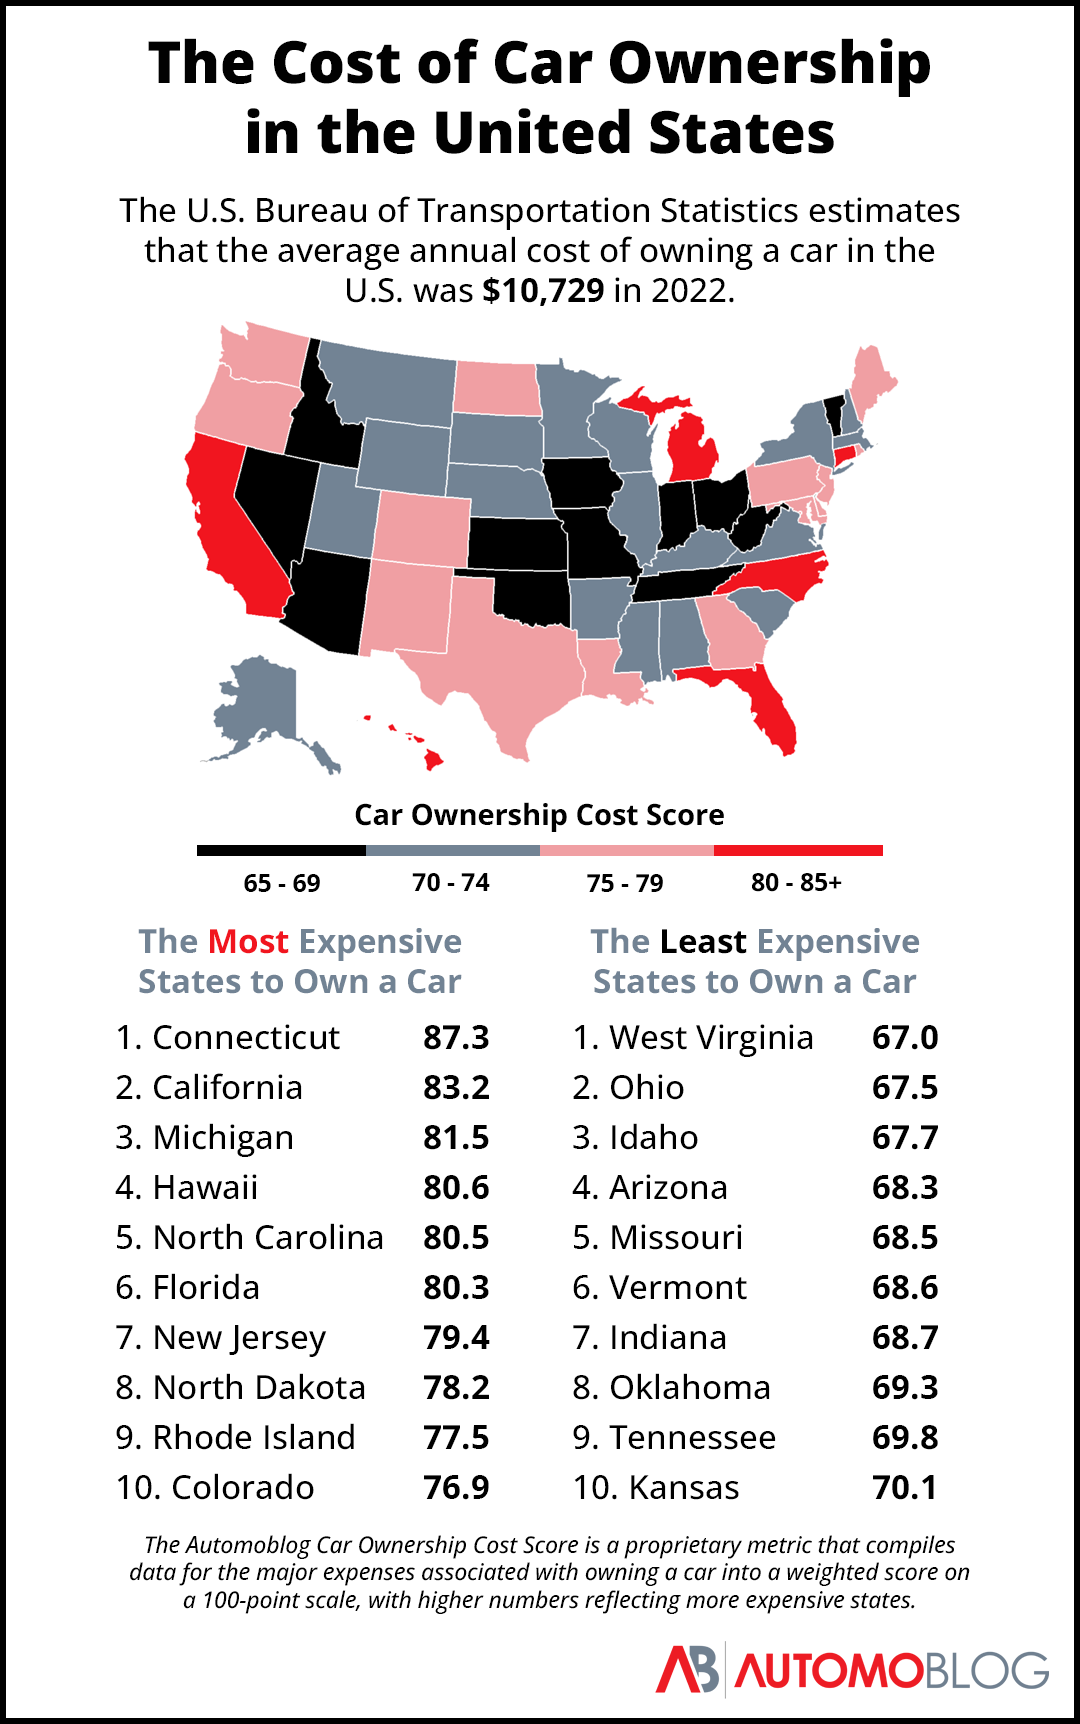 A map and list showing the most and least expensive states to own a car in 2022, showing Connecticut was the most expensive and West Virginia the least expensive.